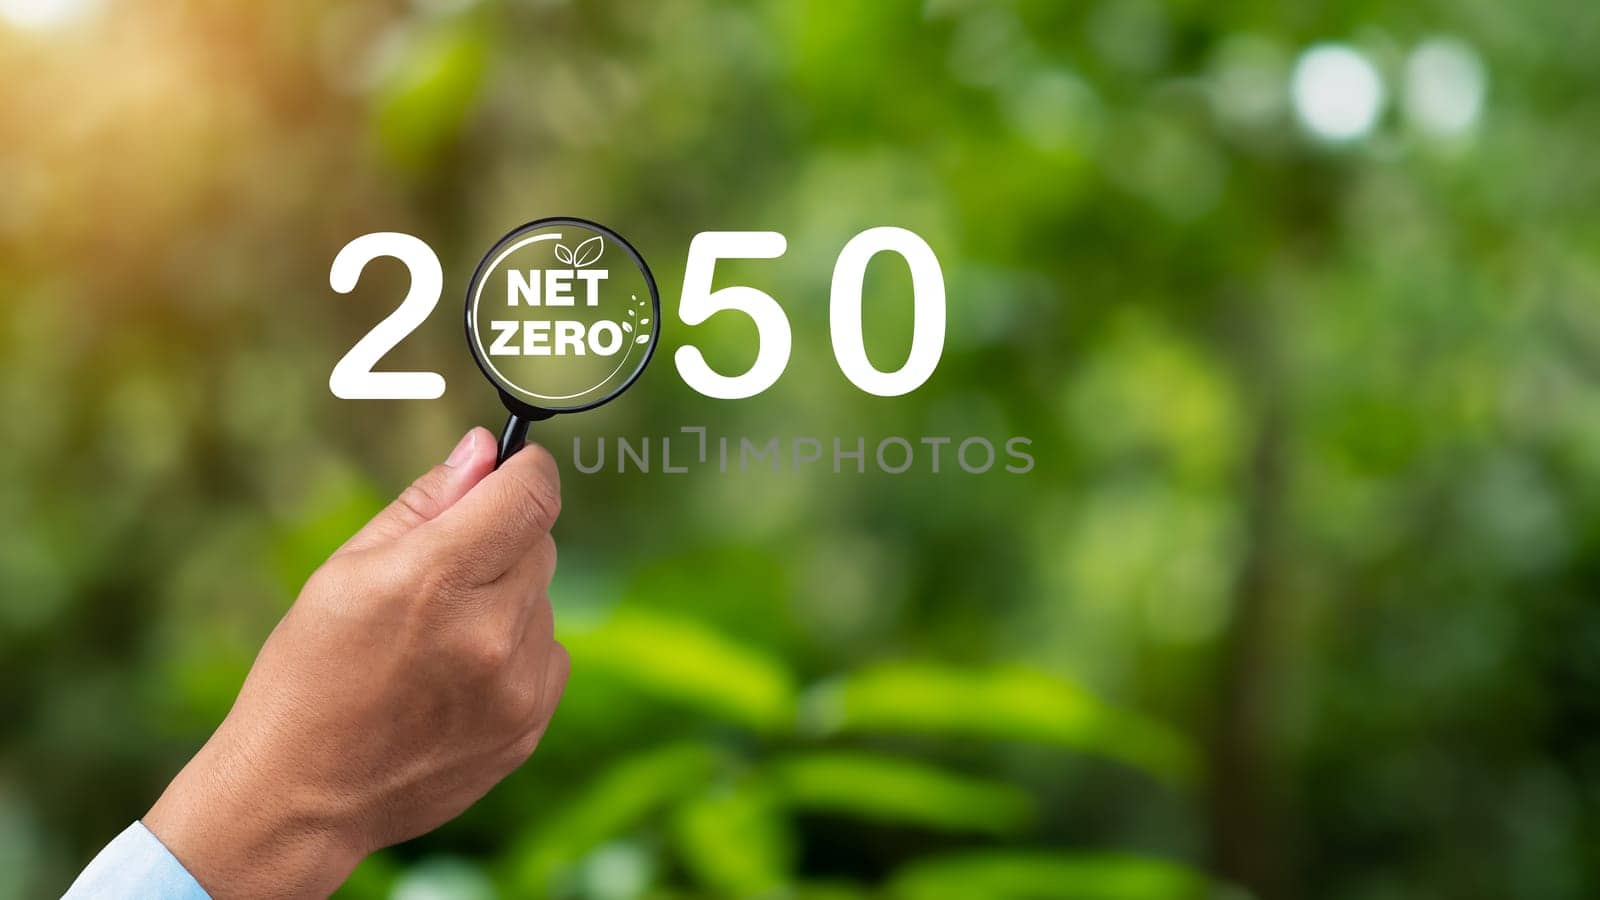 Net zero icon inside magnifier glass, Net zero greenhouse gas emissions target, Carbon neutral and net zero concept, Natural environment Climate-neutral long-term strategy.  by Unimages2527